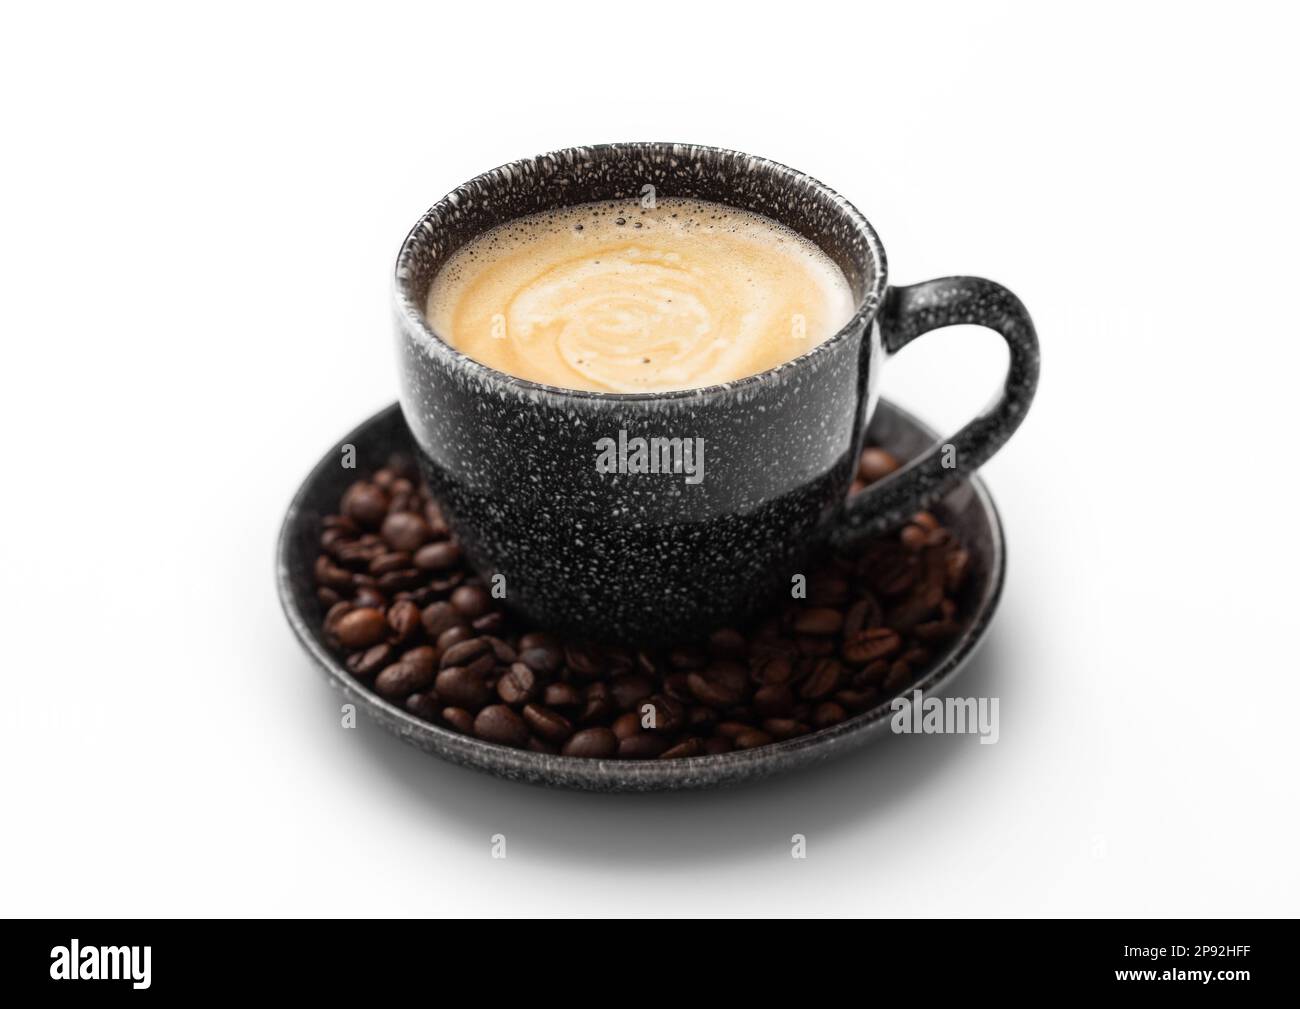 https://c8.alamy.com/comp/2P92HFF/coffee-in-black-porcelain-cup-and-fresh-raw-beans-on-saucer-on-white-2P92HFF.jpg